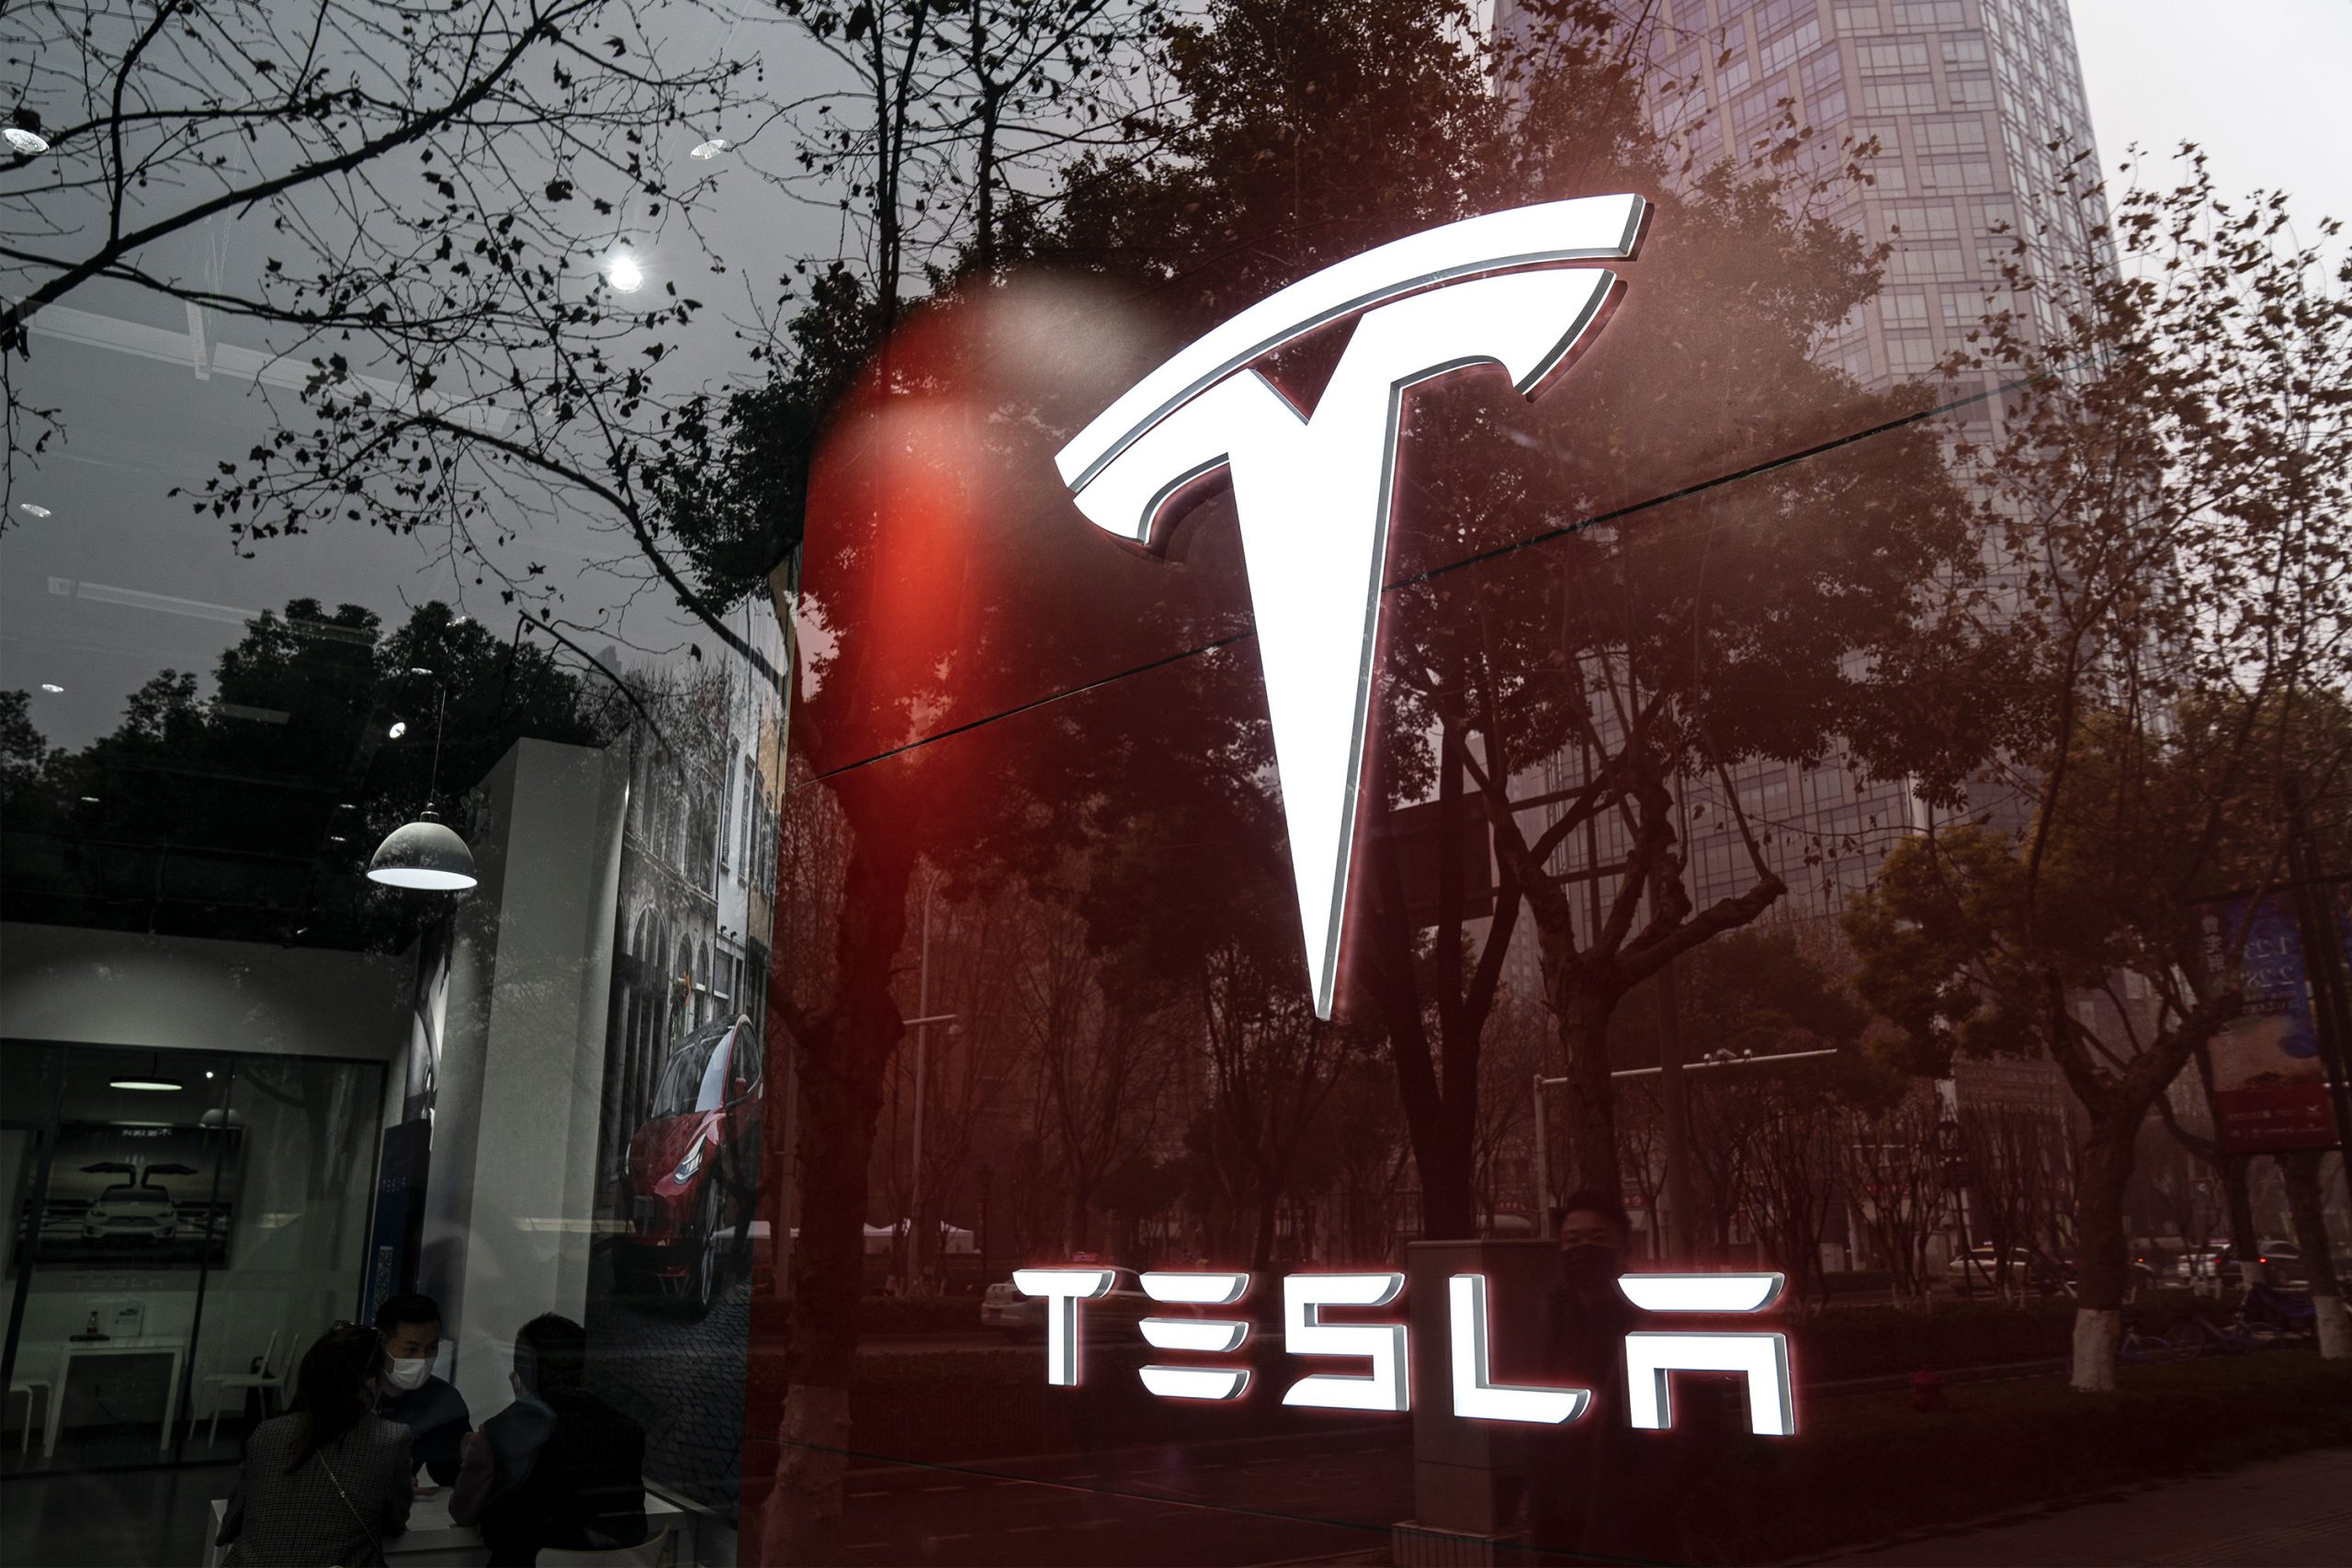 A Tesla store sign is seen on January 23, 2021 in Wuhan, Hubei Province, China